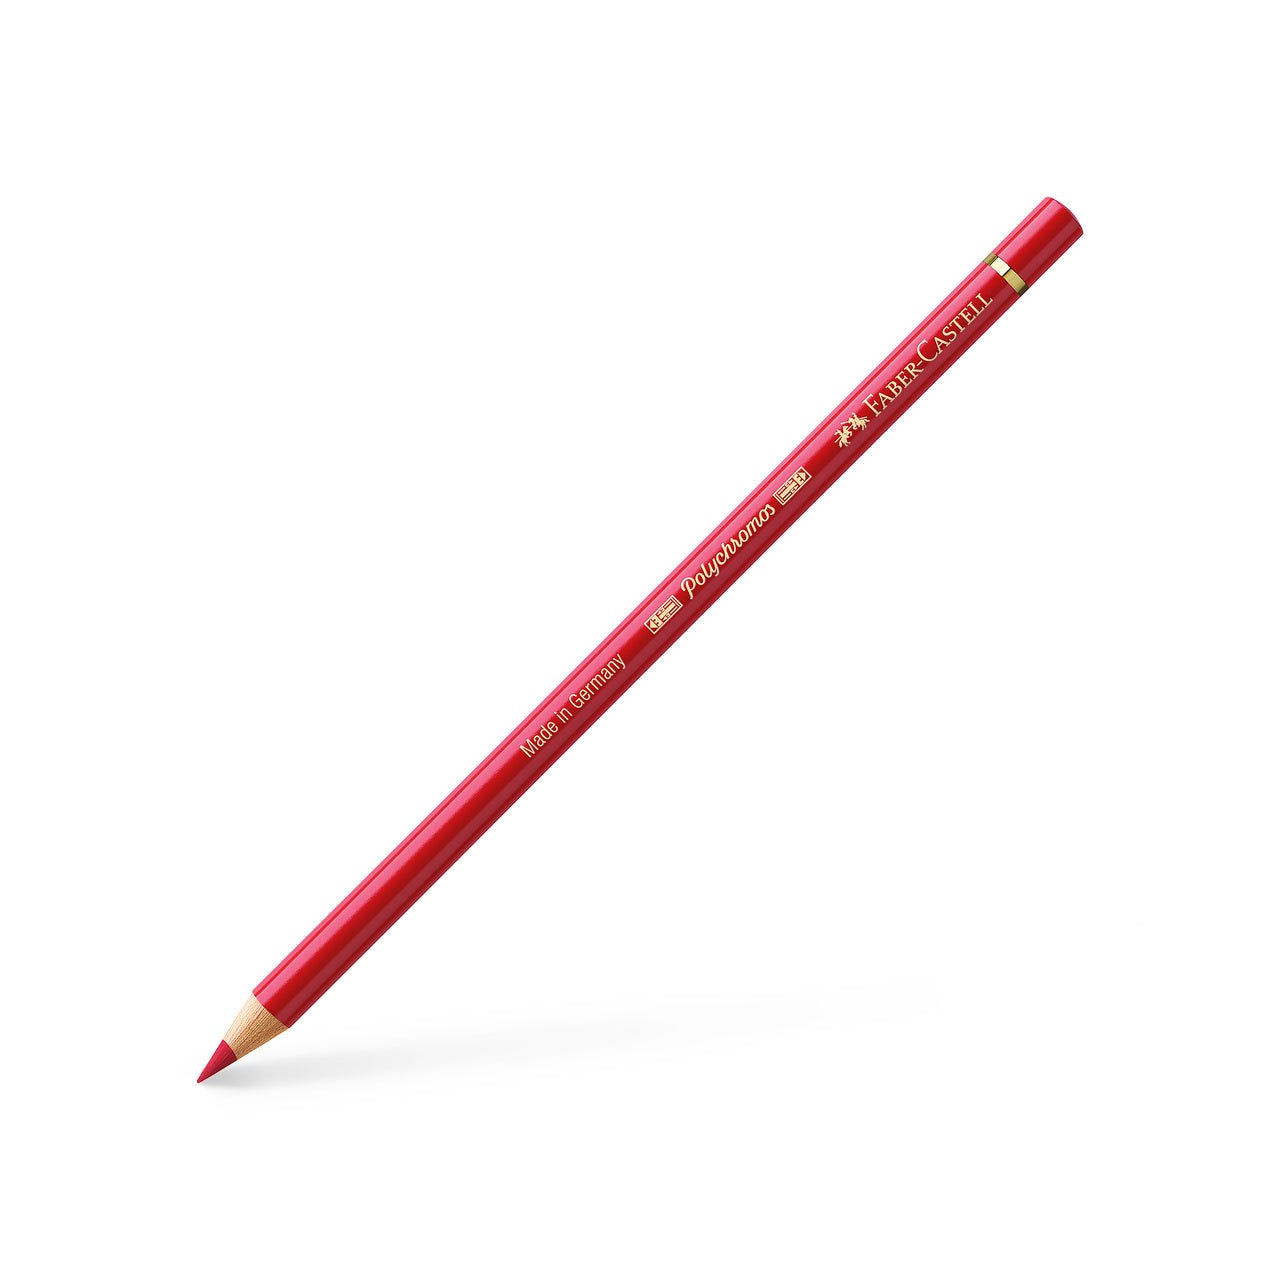 Faber Castell Polychromos Colored Pencil - 219 Deep Scarlet Red - merriartist.com